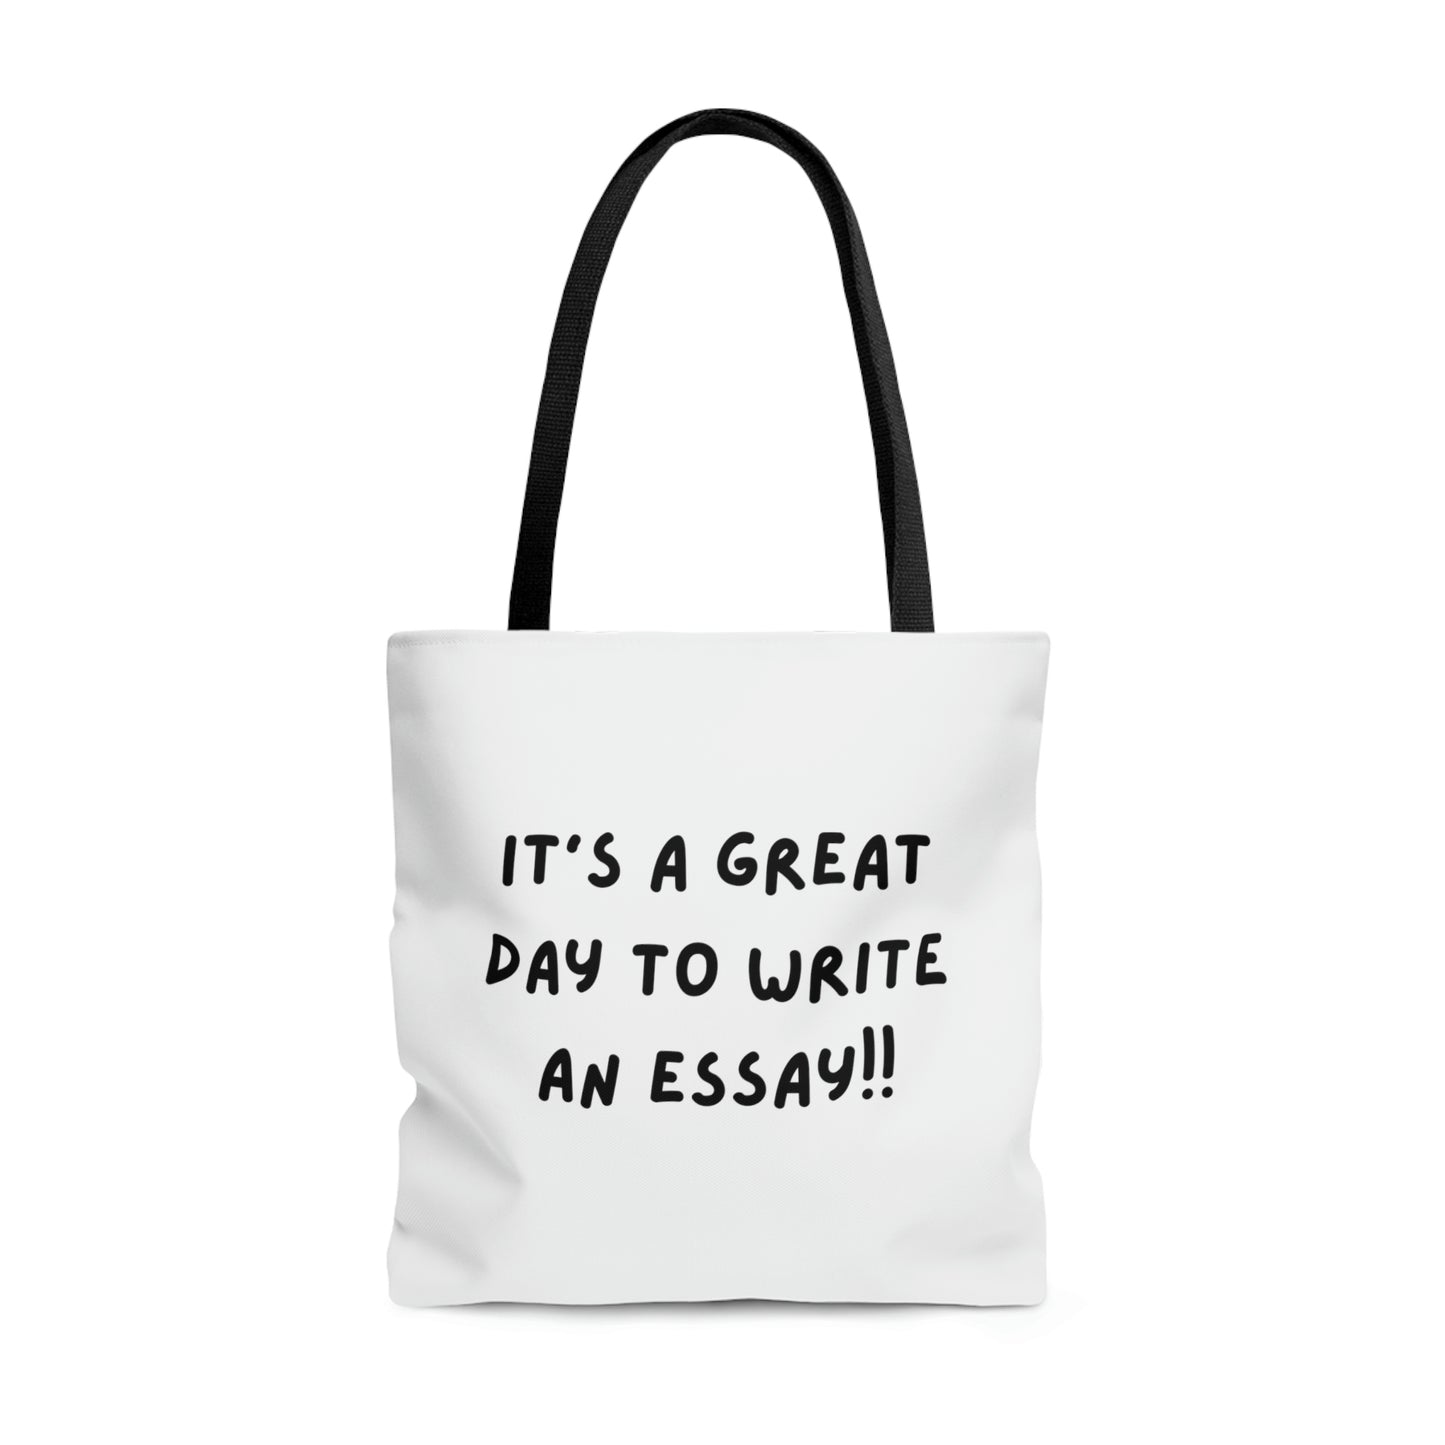 "It's a great day to write an essay"& "Write on" in color Tote Bag